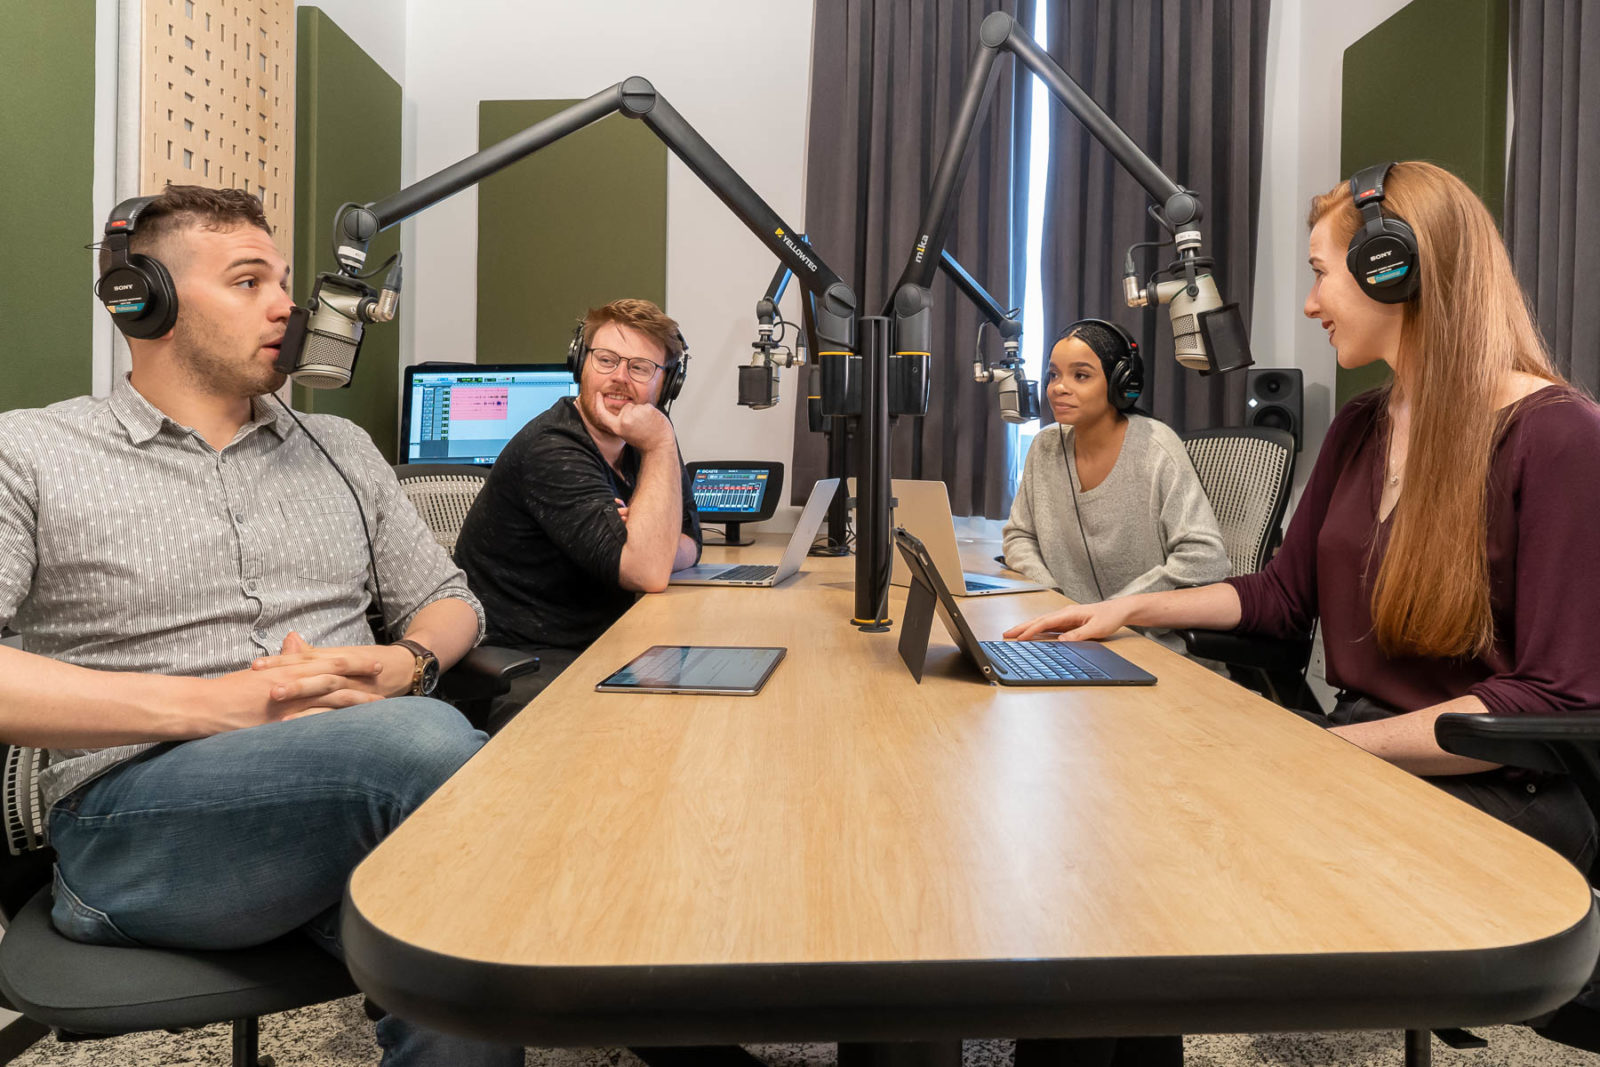 4 people recording a podcast in a sleek studio space